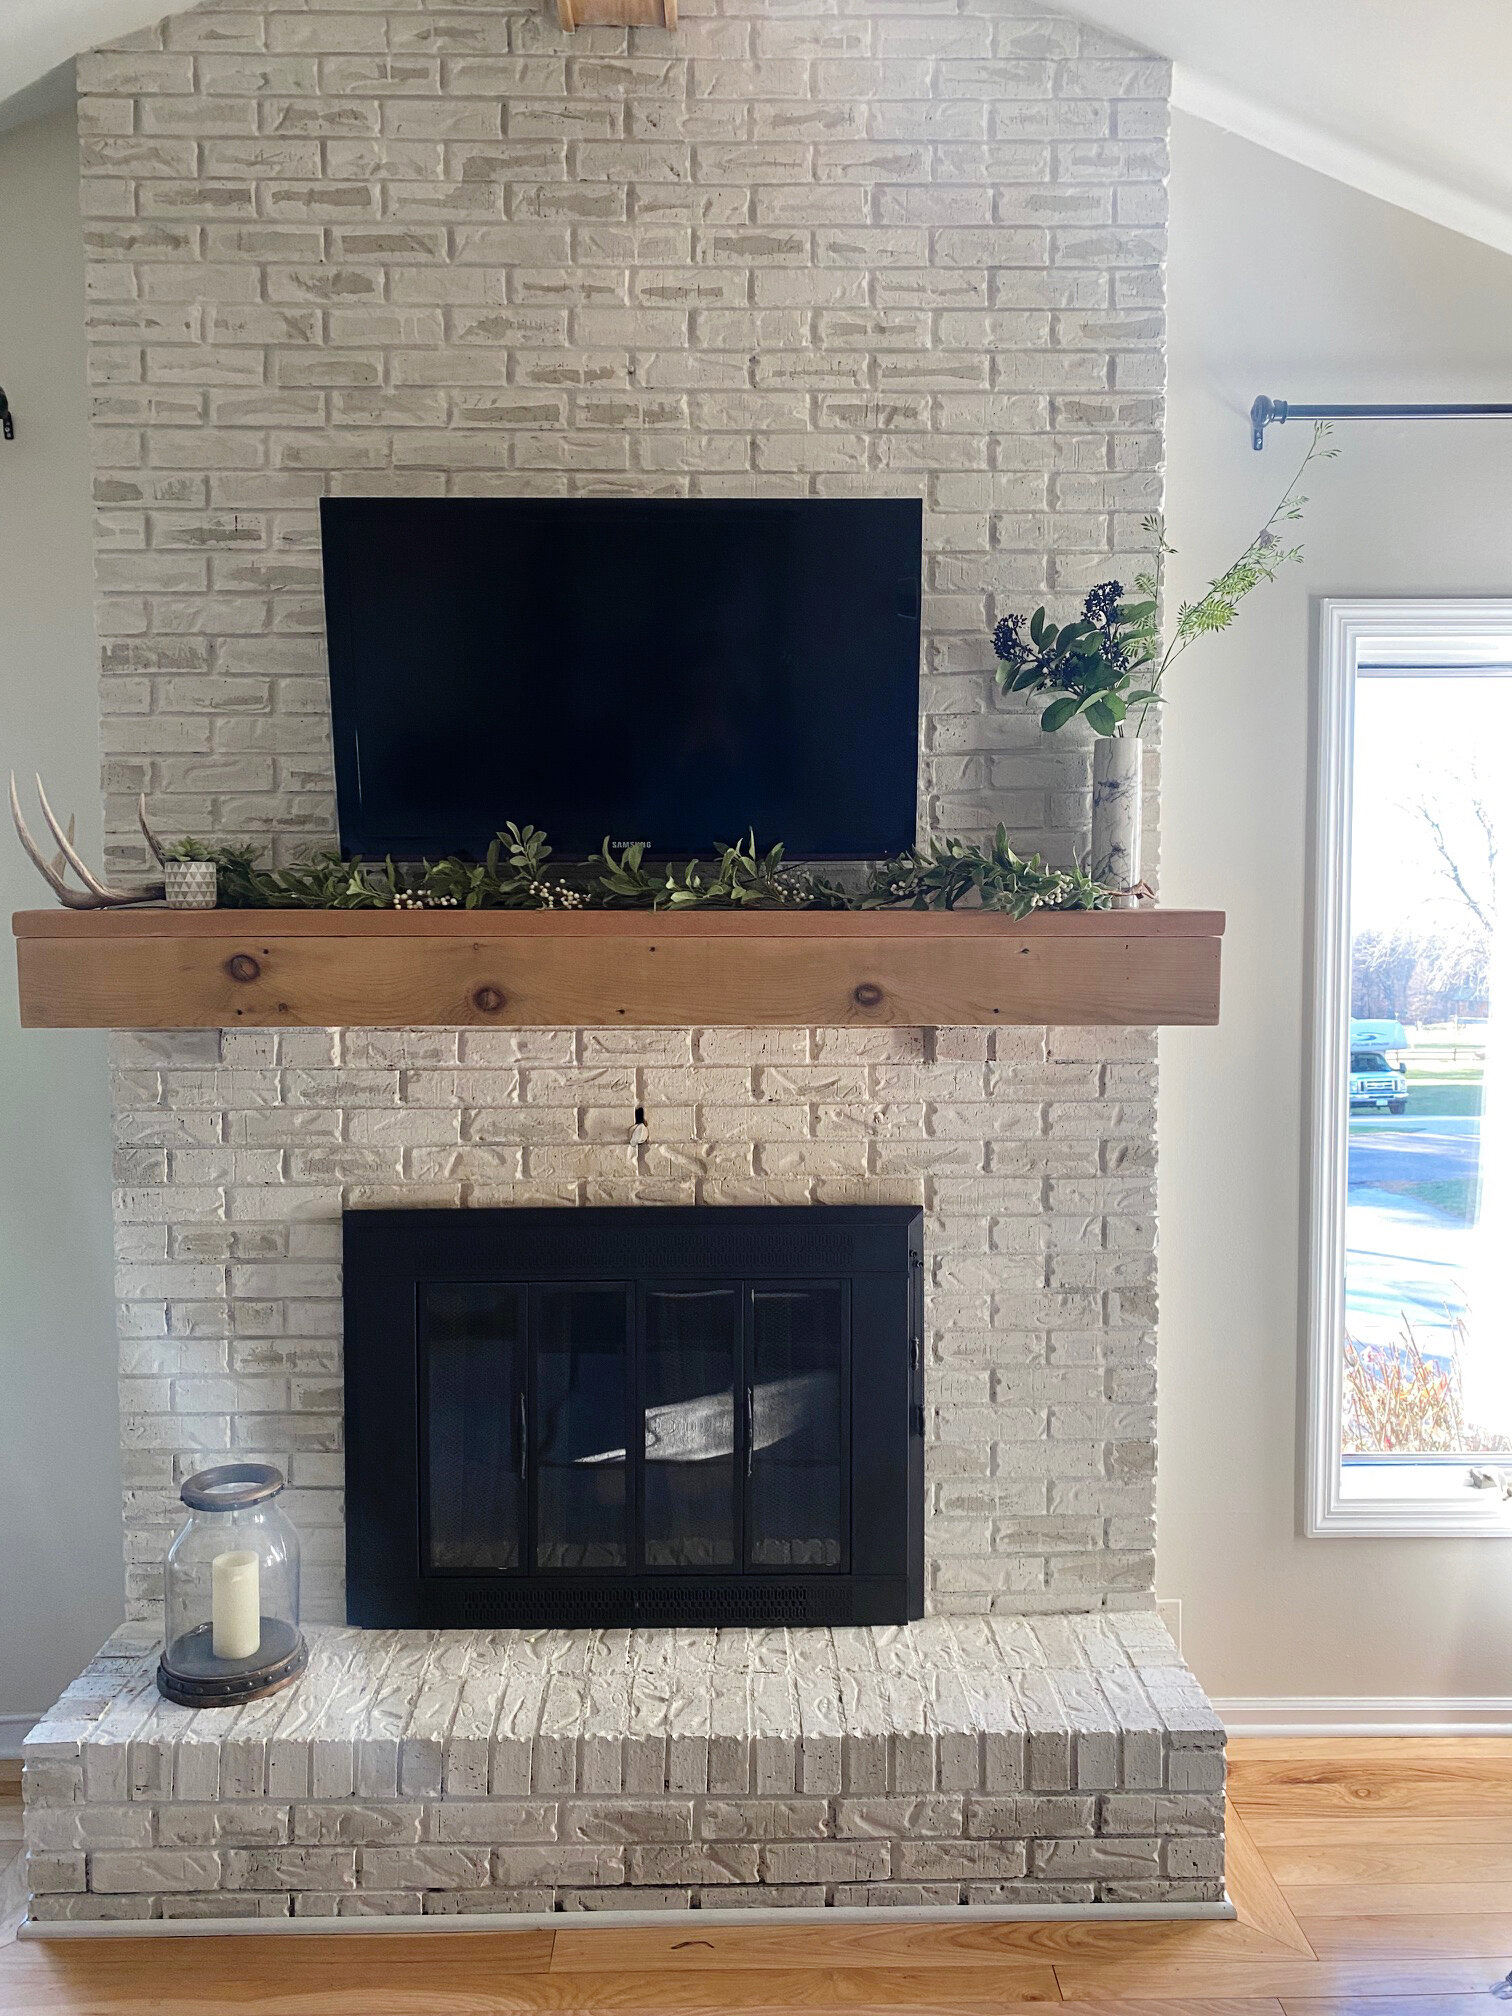 My Painted Brick Fireplace Diy Tutorial, Best Paint For Brick Fireplace Surround